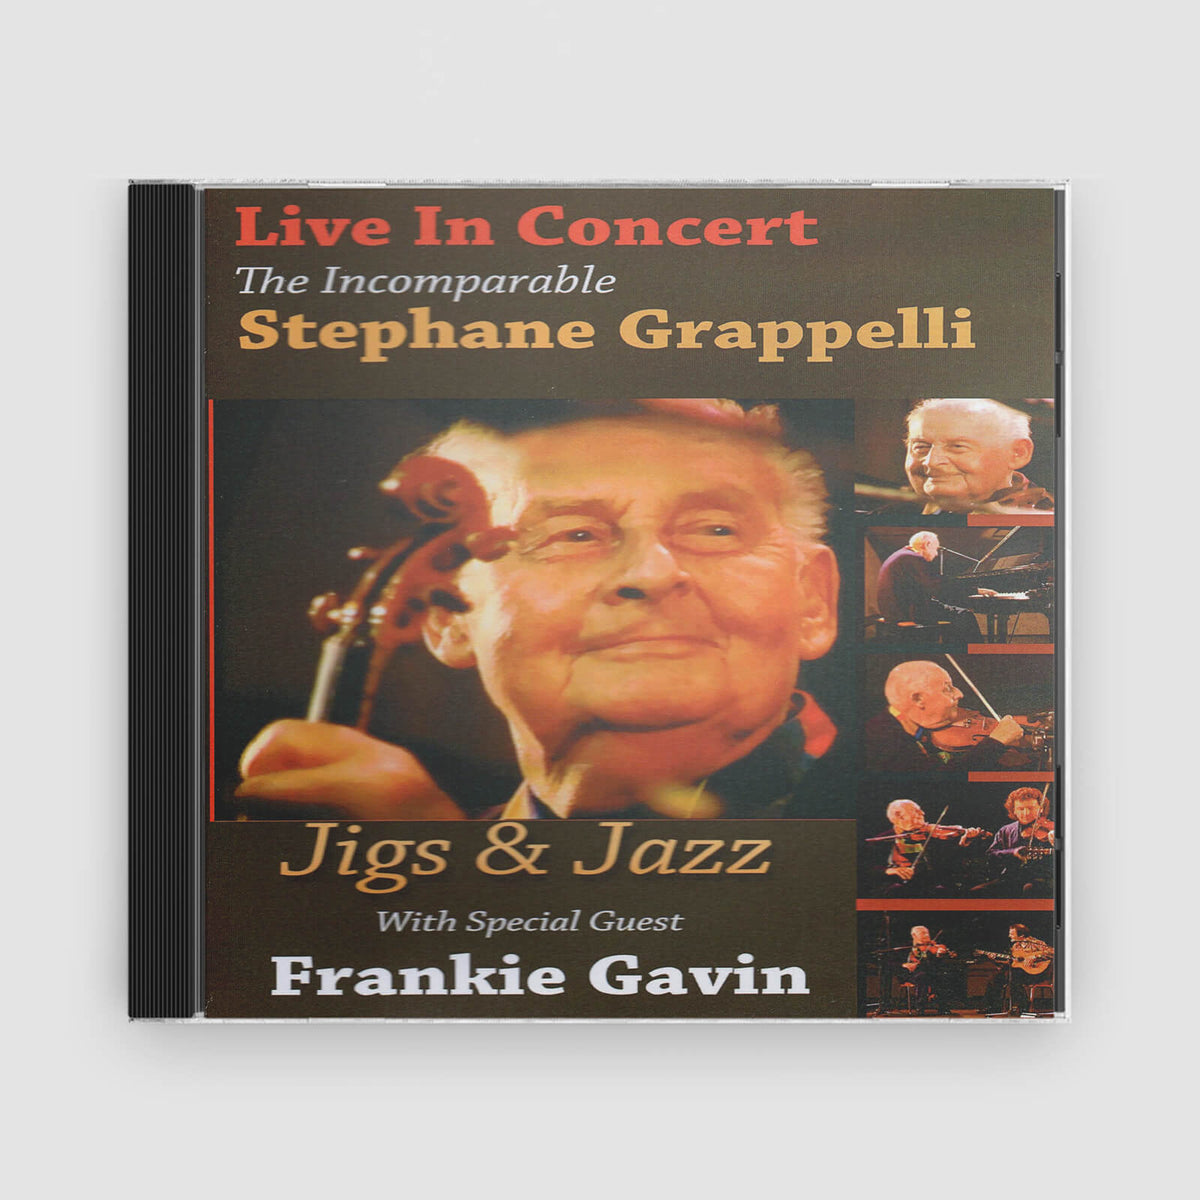 Stephane Grappelli : The Incomparable Stephane Grappelli In Concert